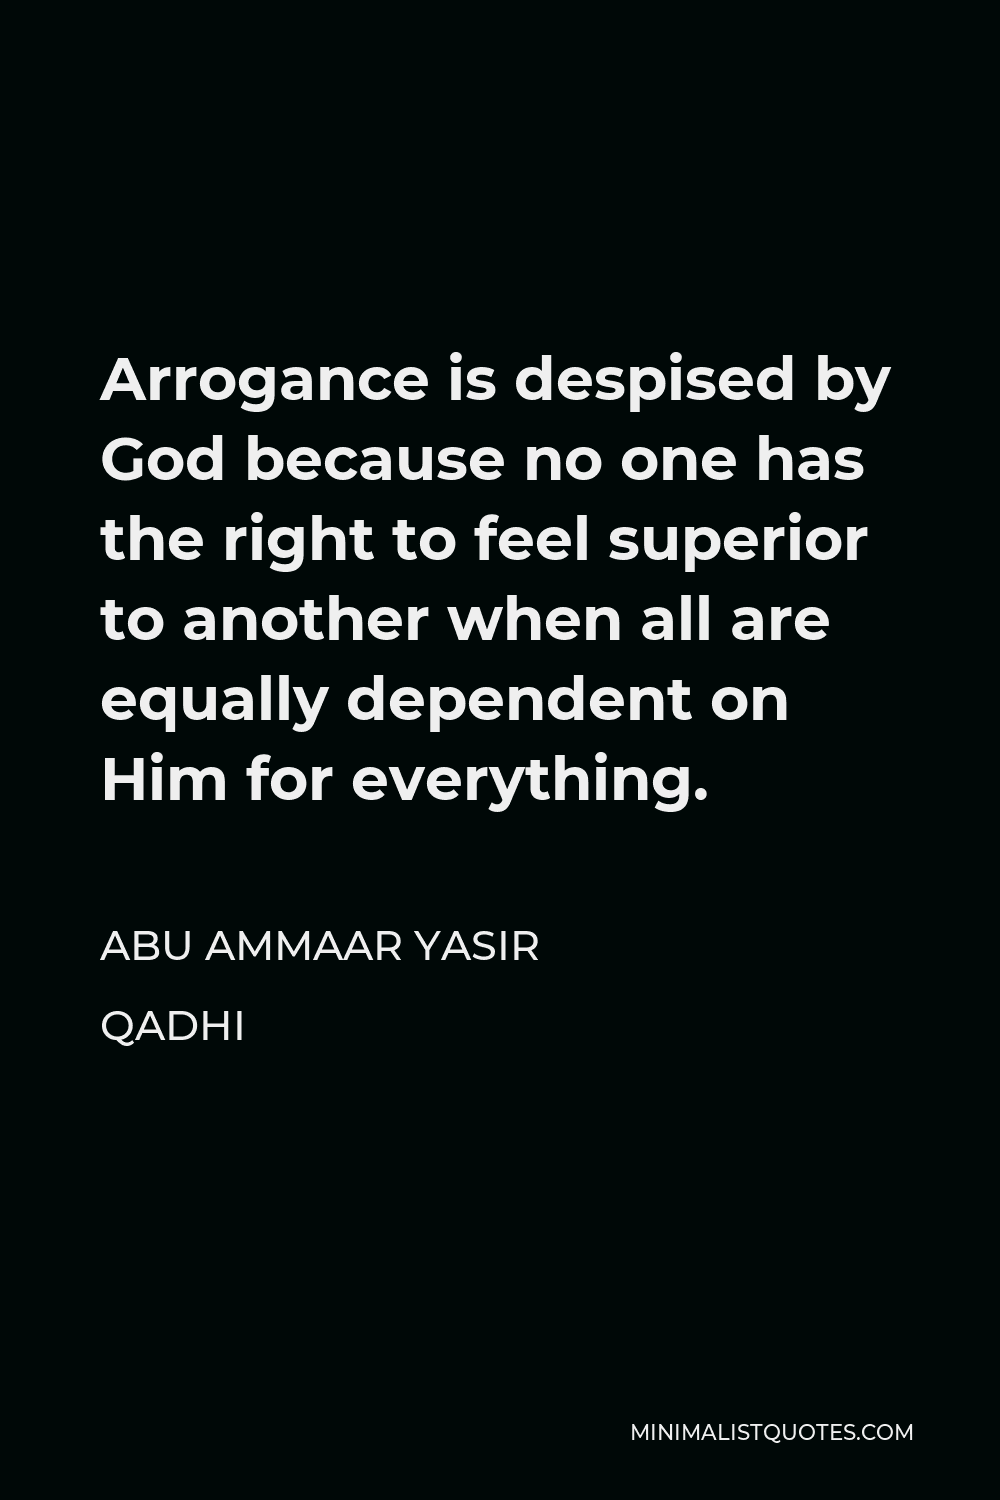 Abu Ammaar Yasir Qadhi Quote - Arrogance is despised by God because no one has the right to feel superior to another when all are equally dependent on Him for everything.